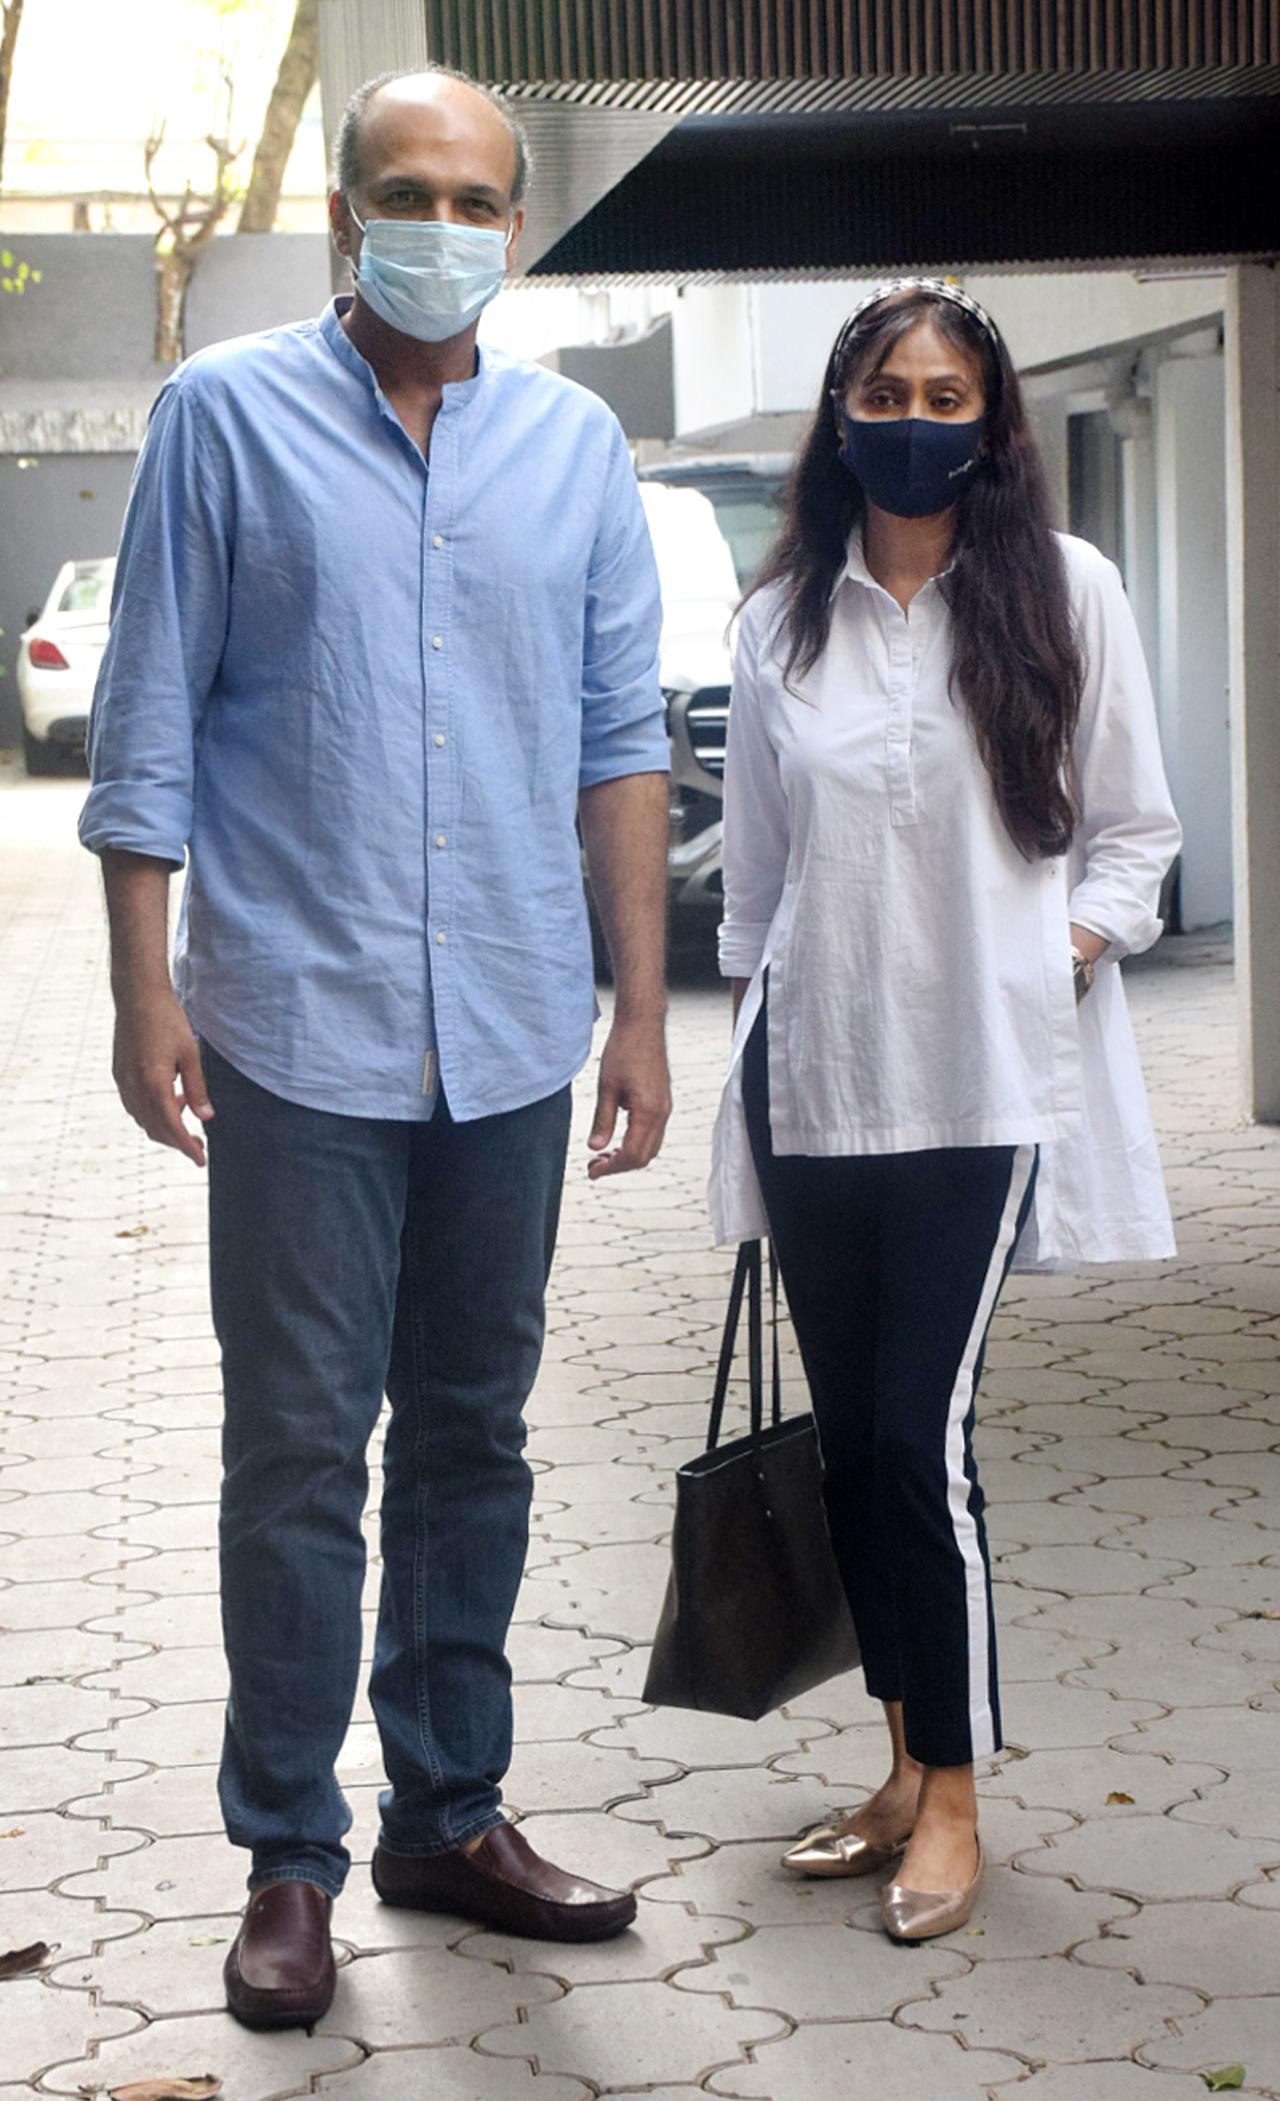 Filmmaker Ashutosh Gowariker was also snapped outside Javed Akhtar's house in Juhu, Mumbai. He was accompanied by his wife, Sunita Gowariker. We wonder what was the meeting for!